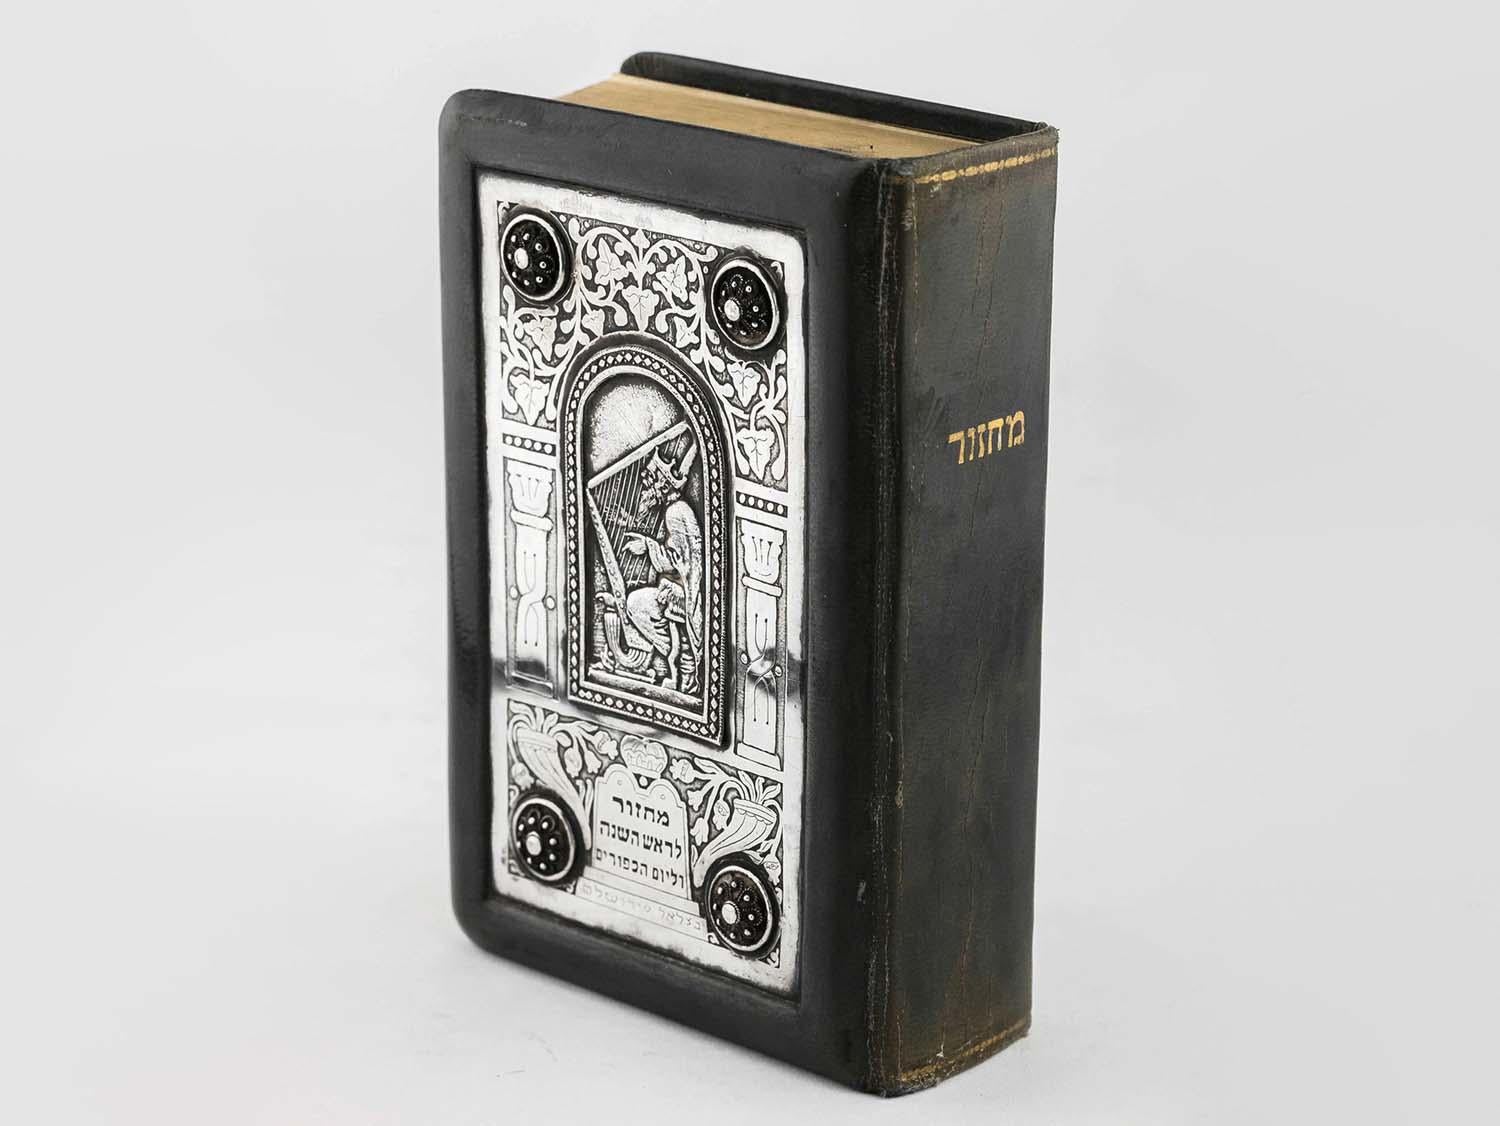 Machzor for Rosh Ha’Shana/Yom Kippur.
Leather binding with a silver on plaque cover by Bezalel Jerusalem. Depiction of King David with his Harp, set within frame of two ornamental arches with four applique bosses at corners. Additional grape design